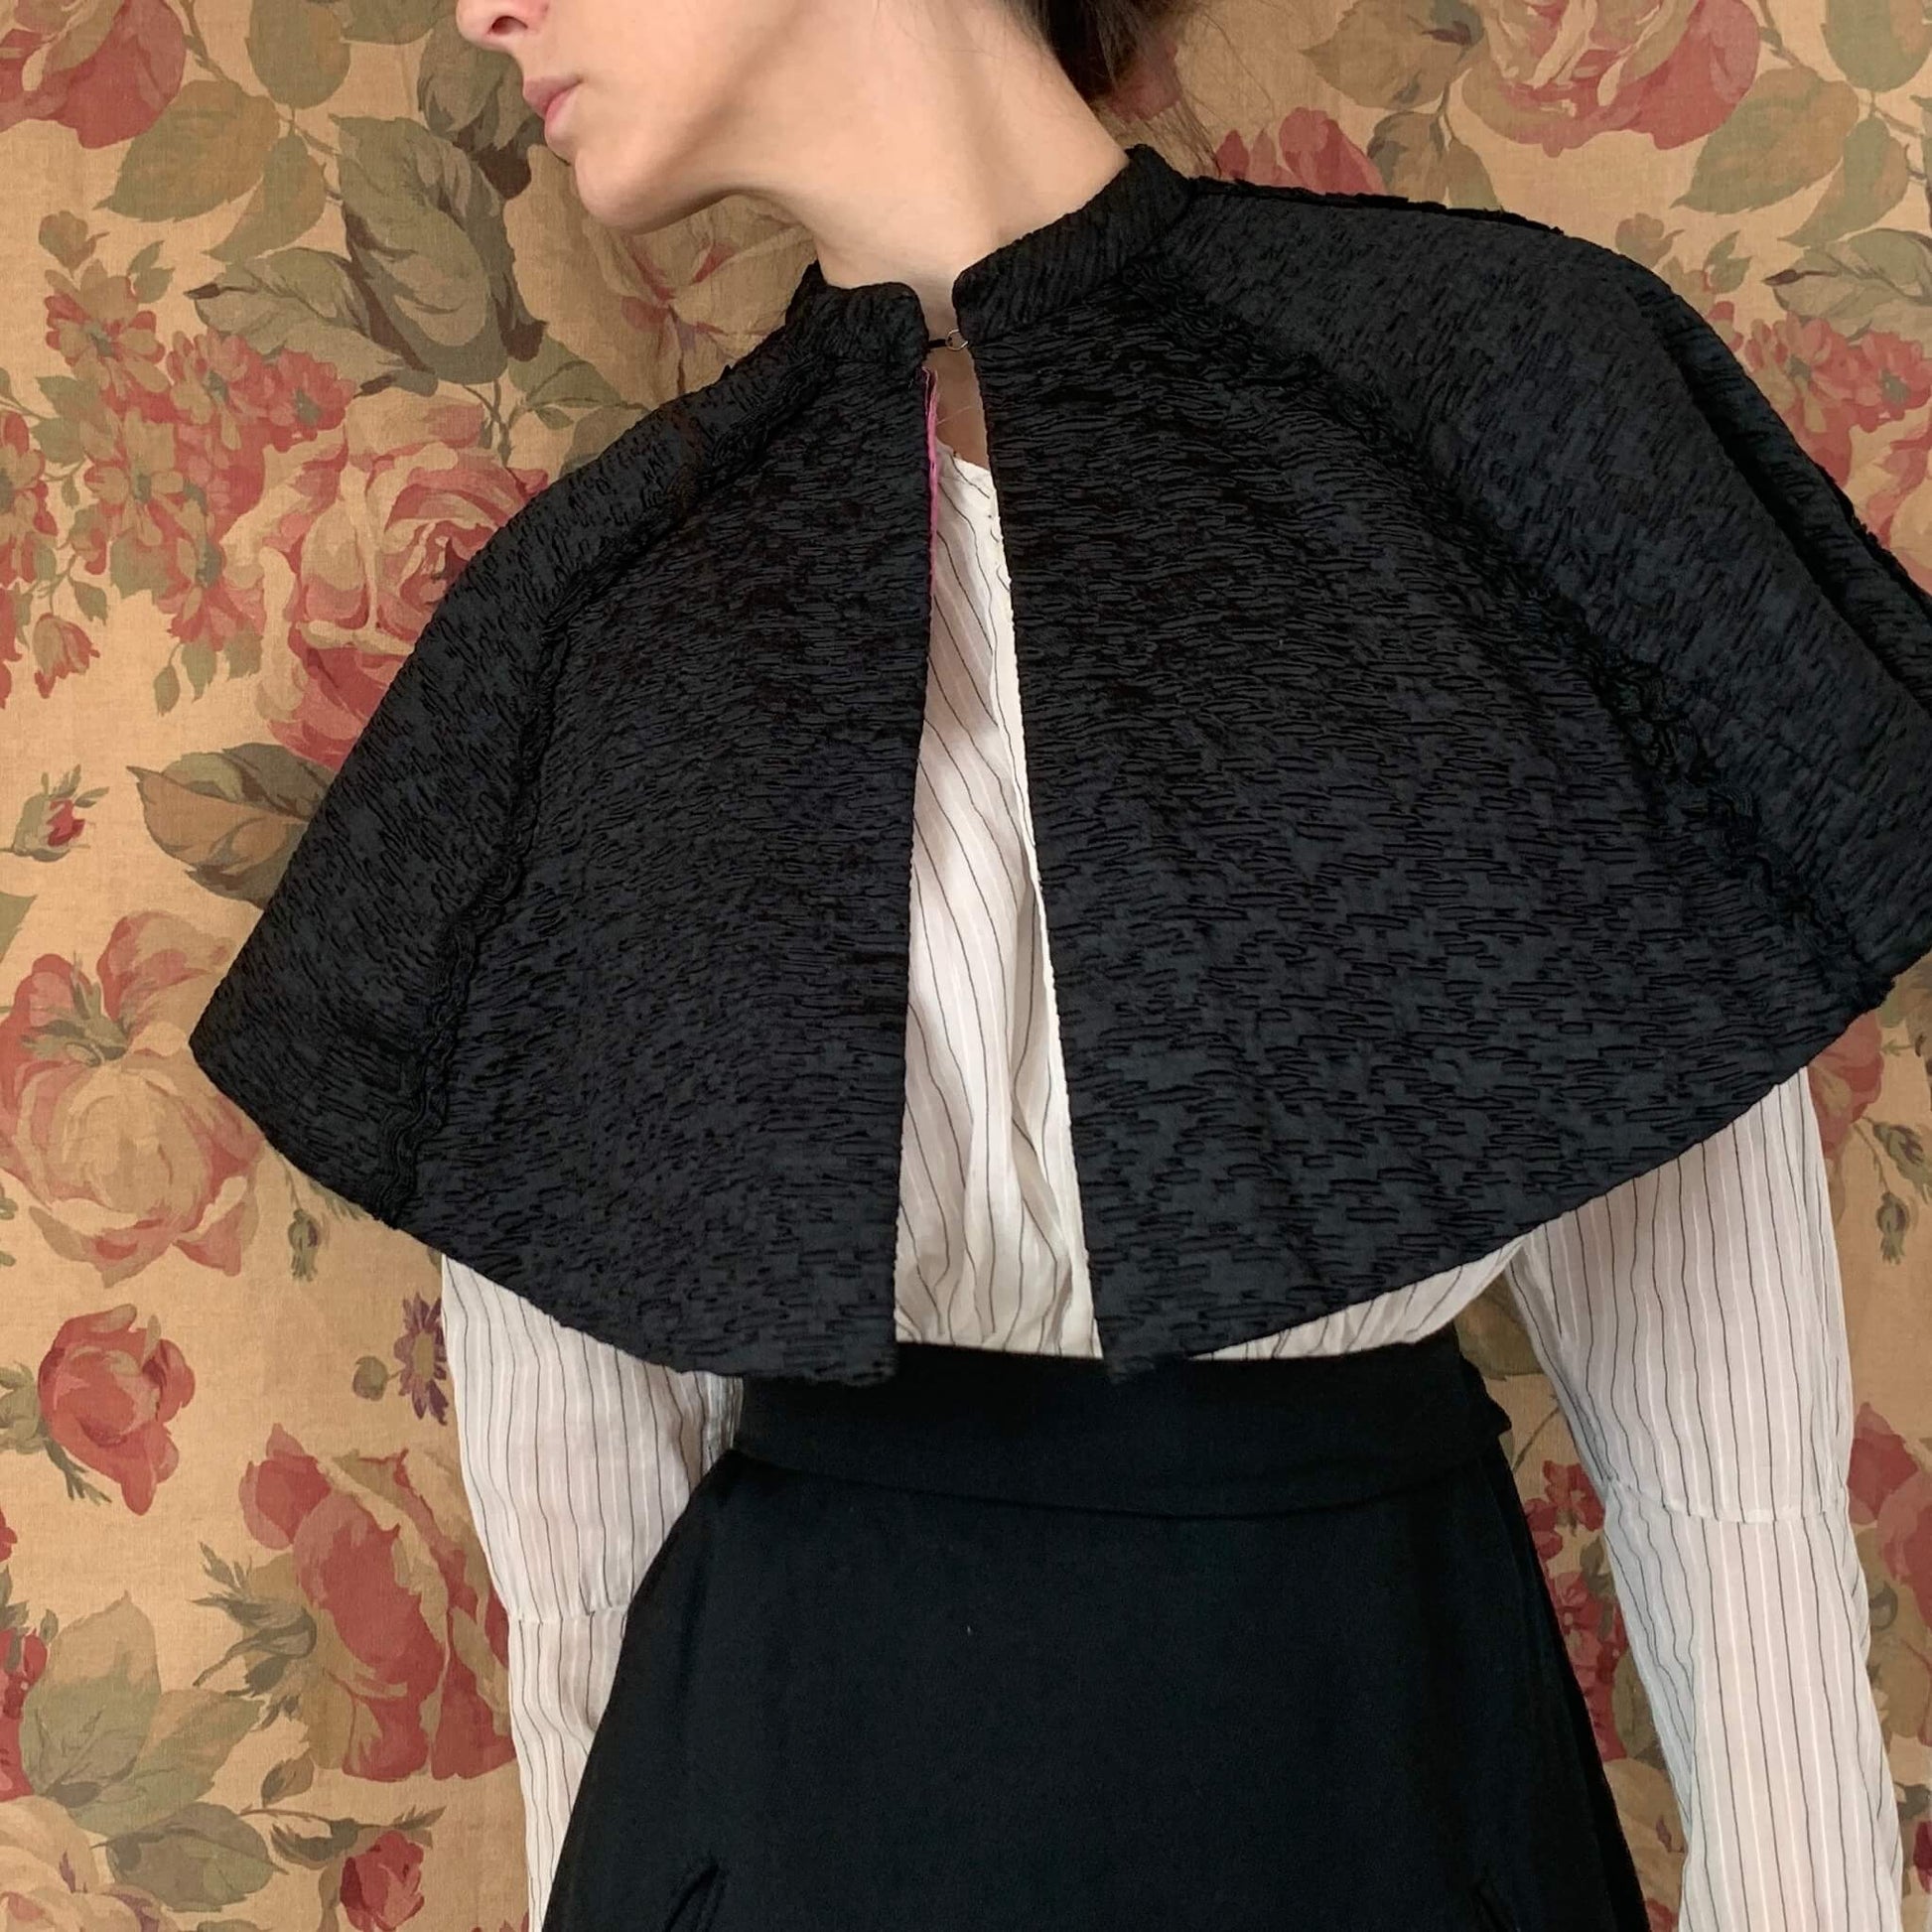 The antique capelet with textured black fabric shown on the model